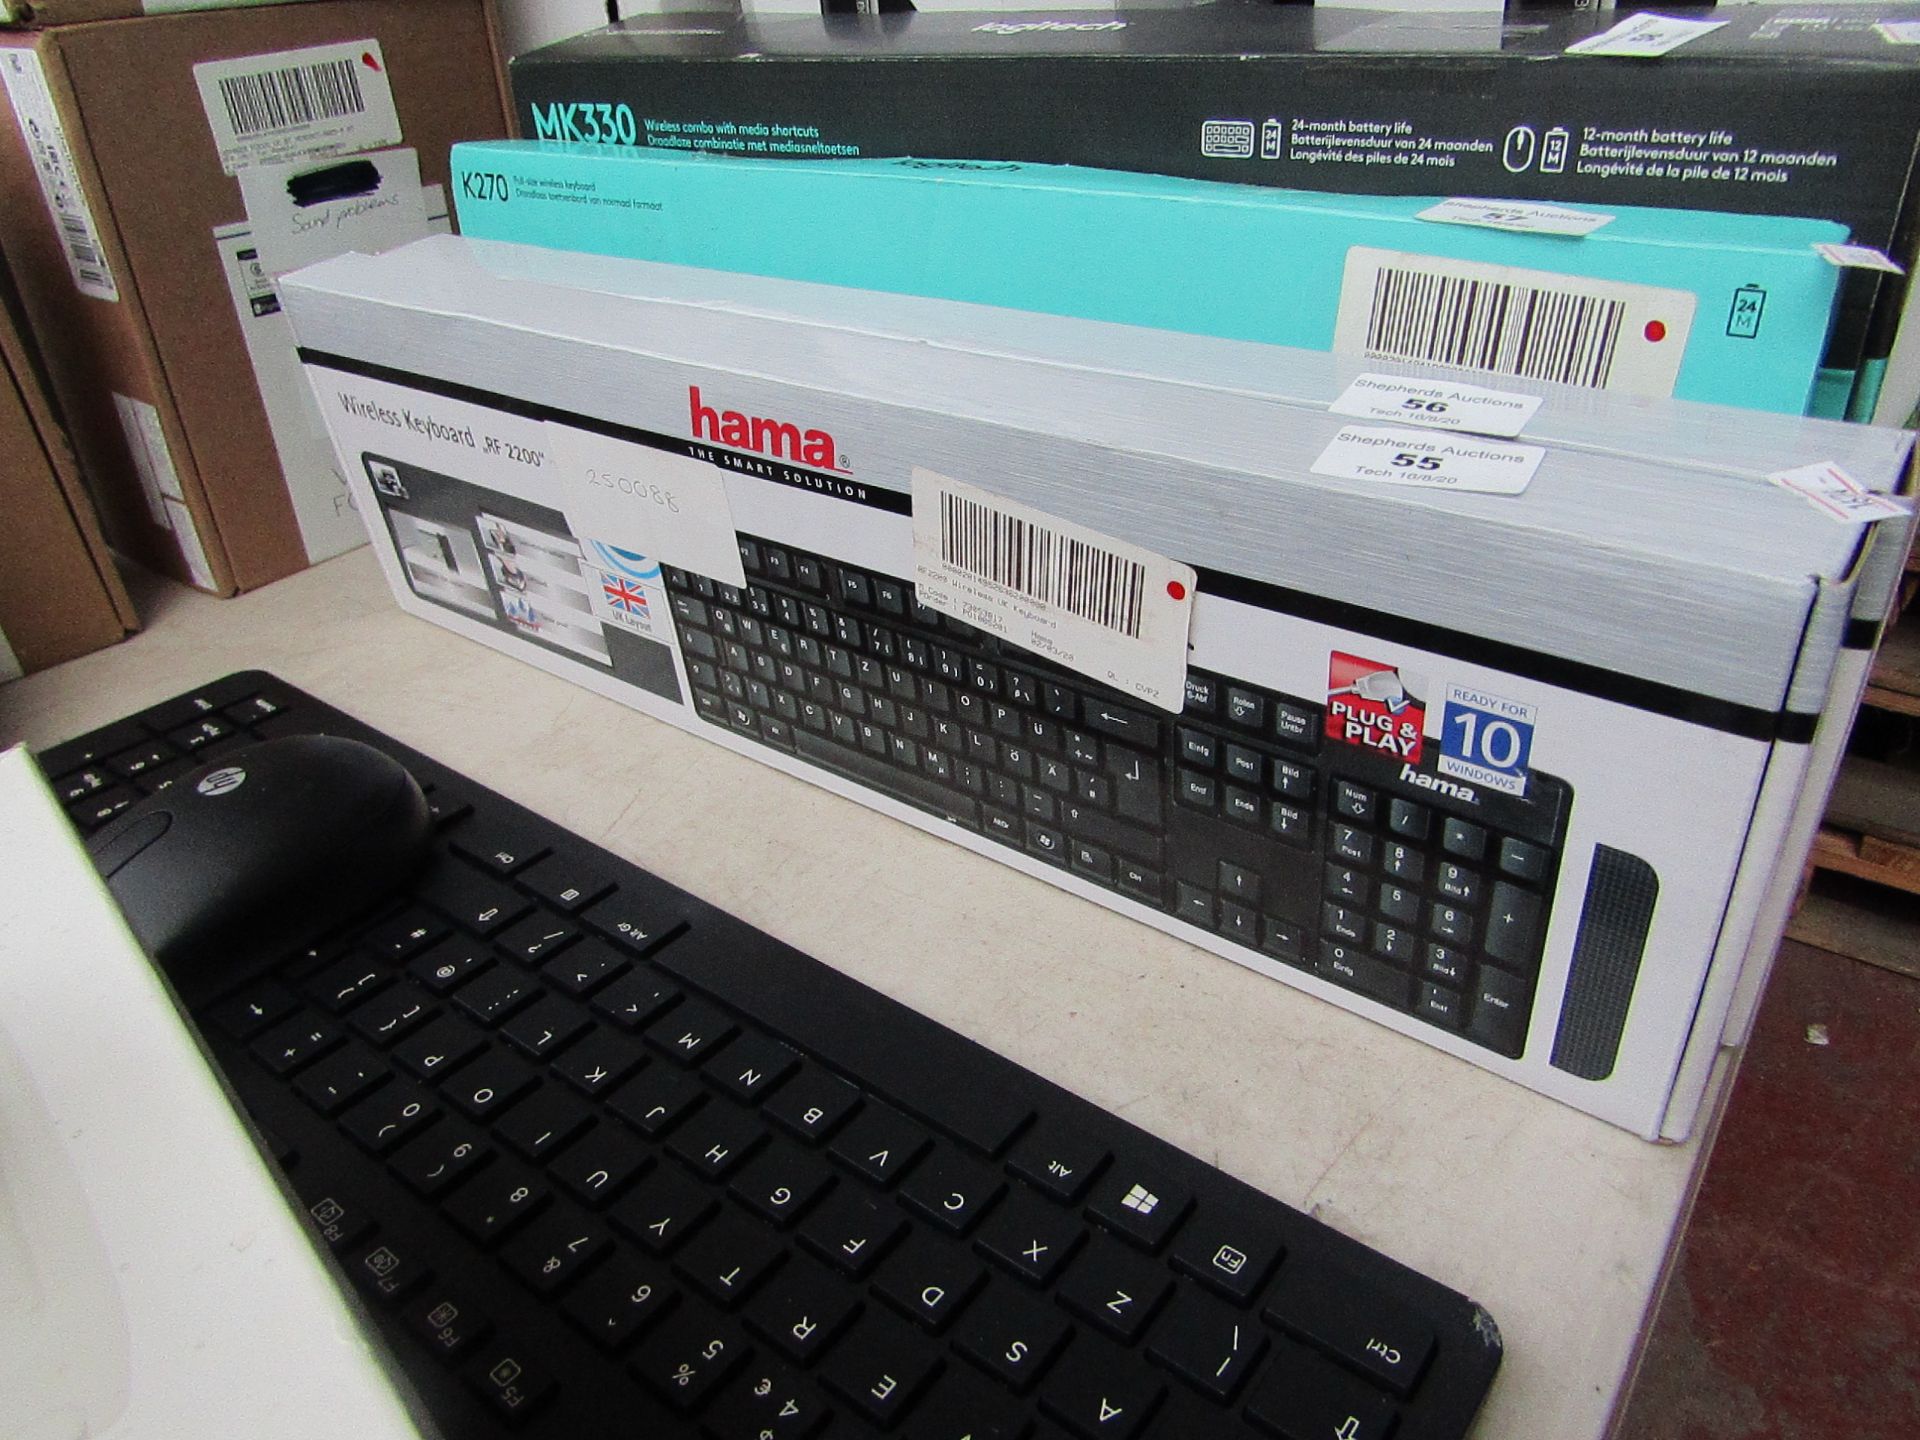 Hama wireless keyboard RF 2200, unchecked and boxed.